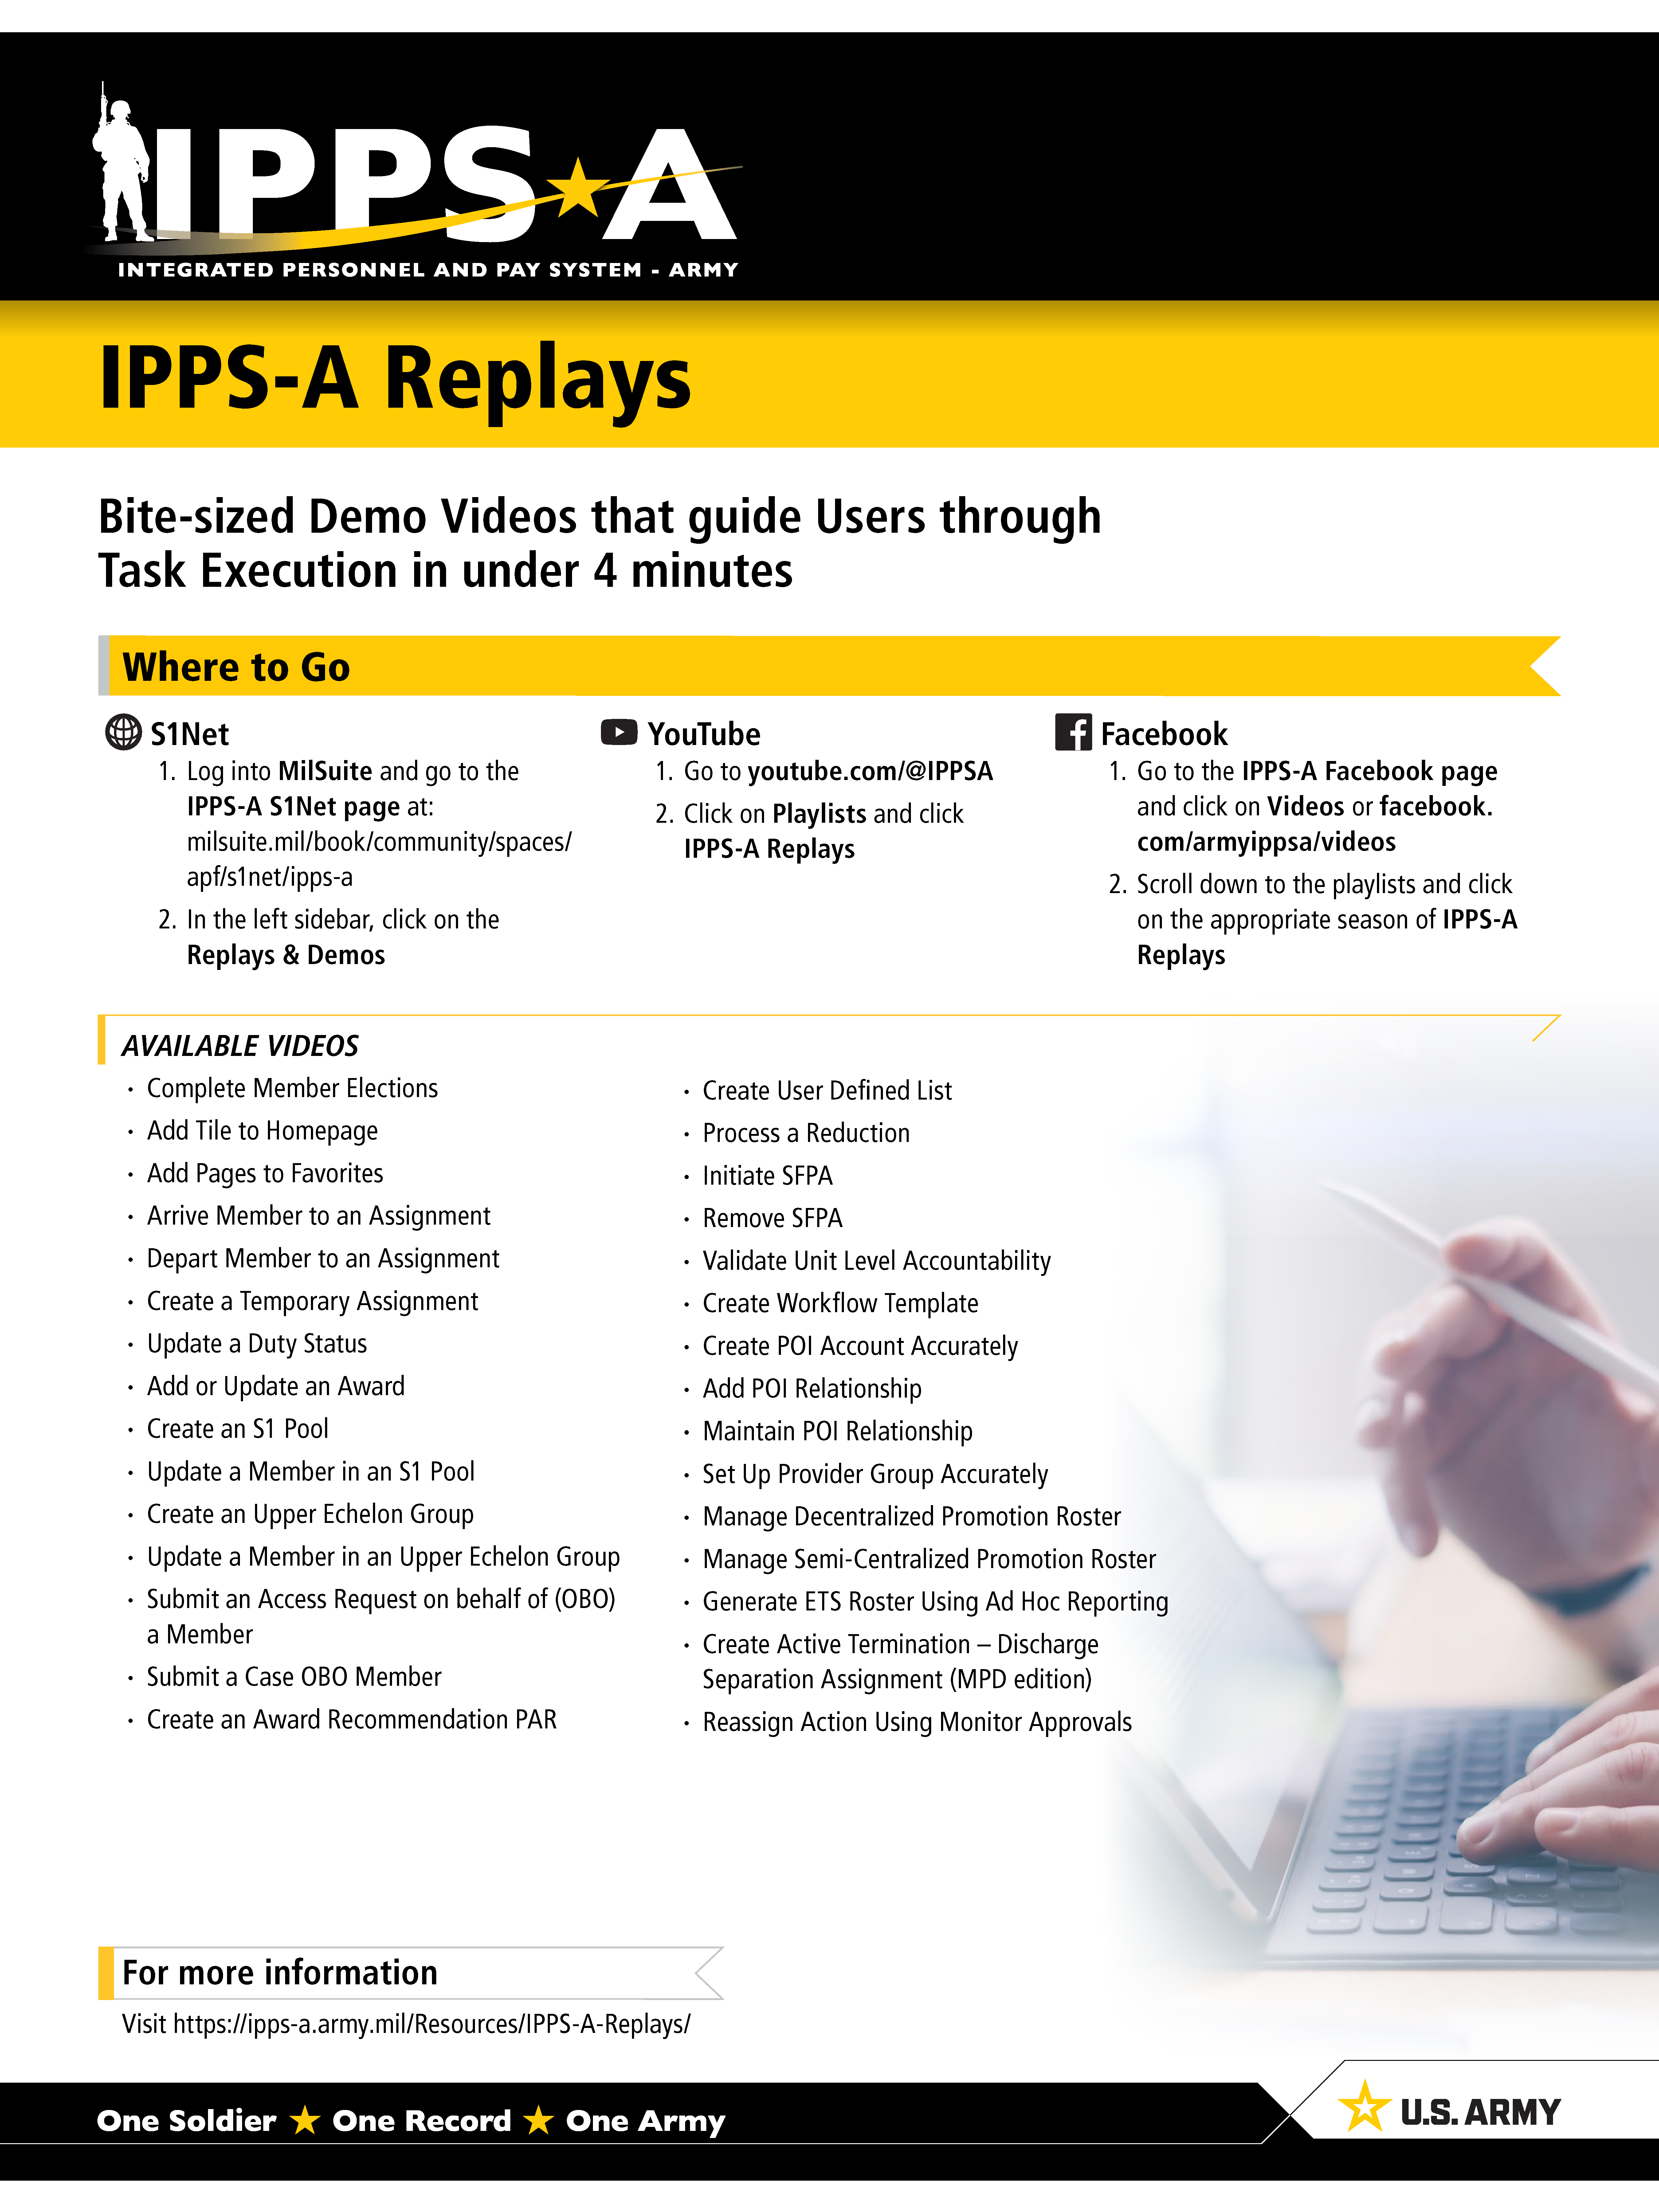 IPPS-A Replays